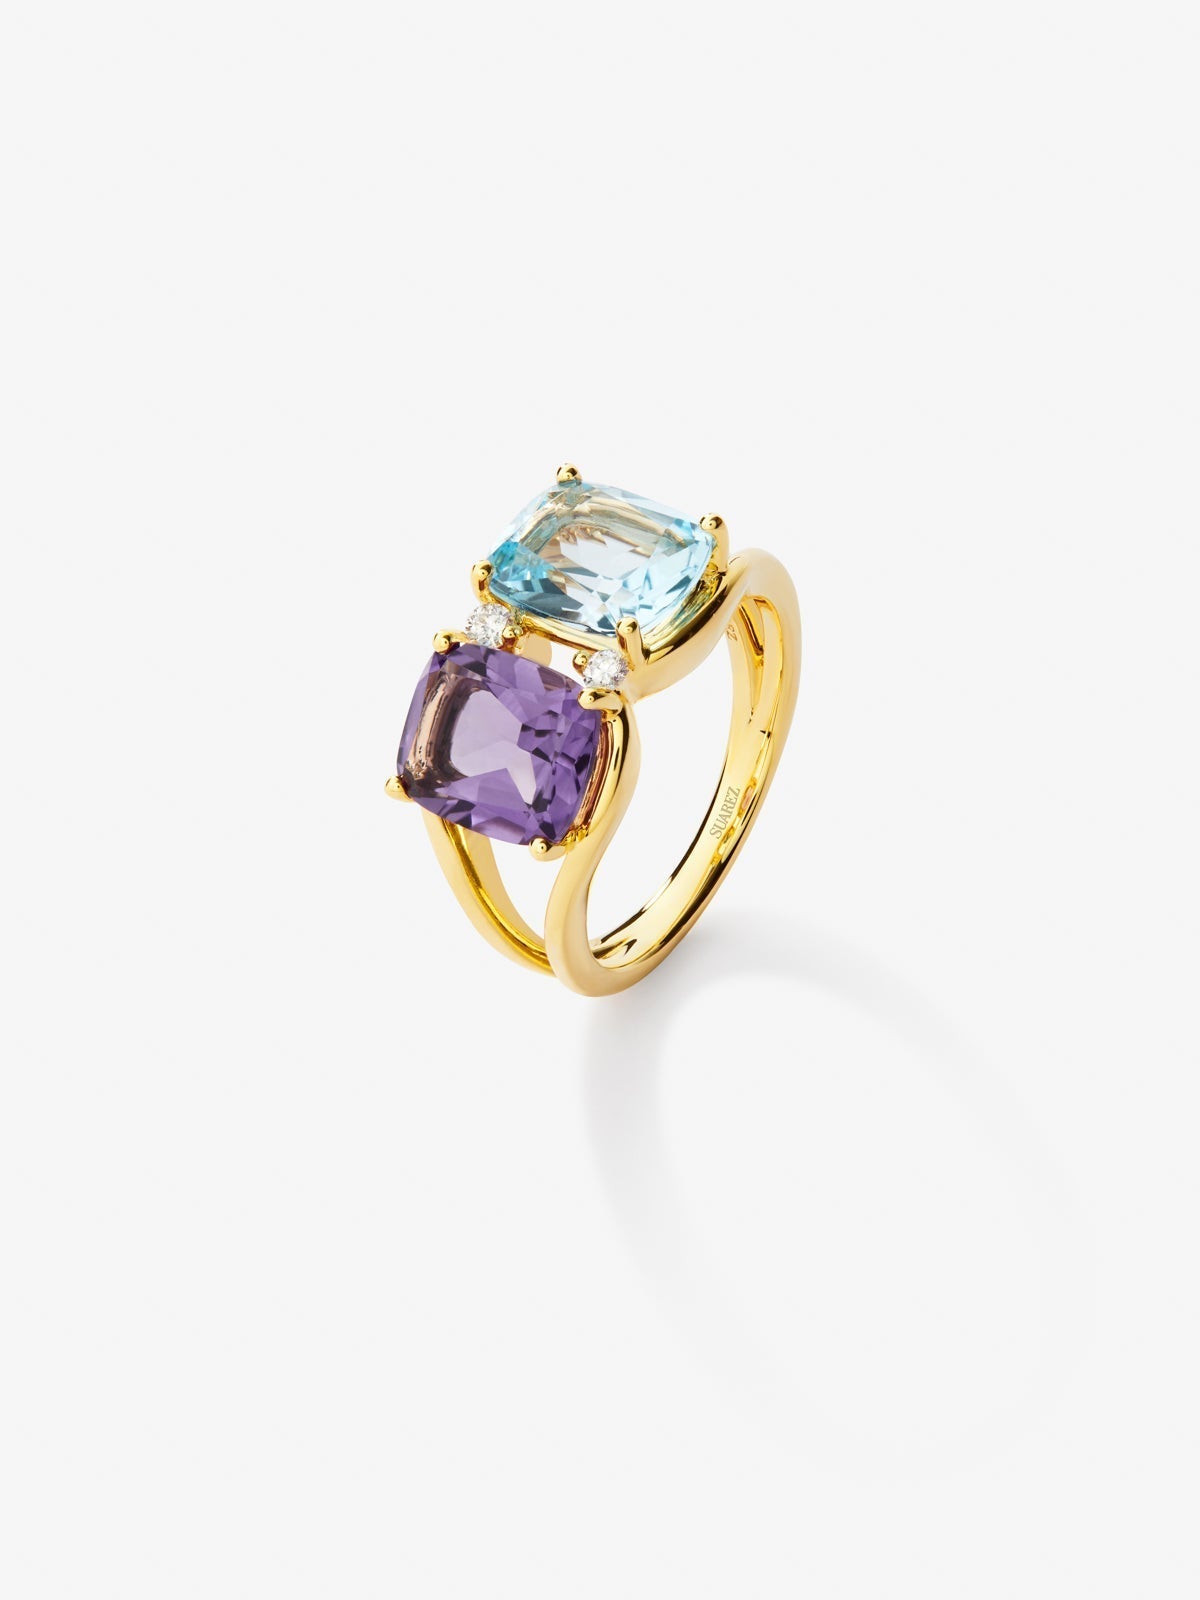 18K yellow gold ring with 2 ct cushion-cut purple amethyst, 2.75 ct cushion-cut sky blue topaz and 2 brilliant-cut diamonds with a total of 0.06 cts